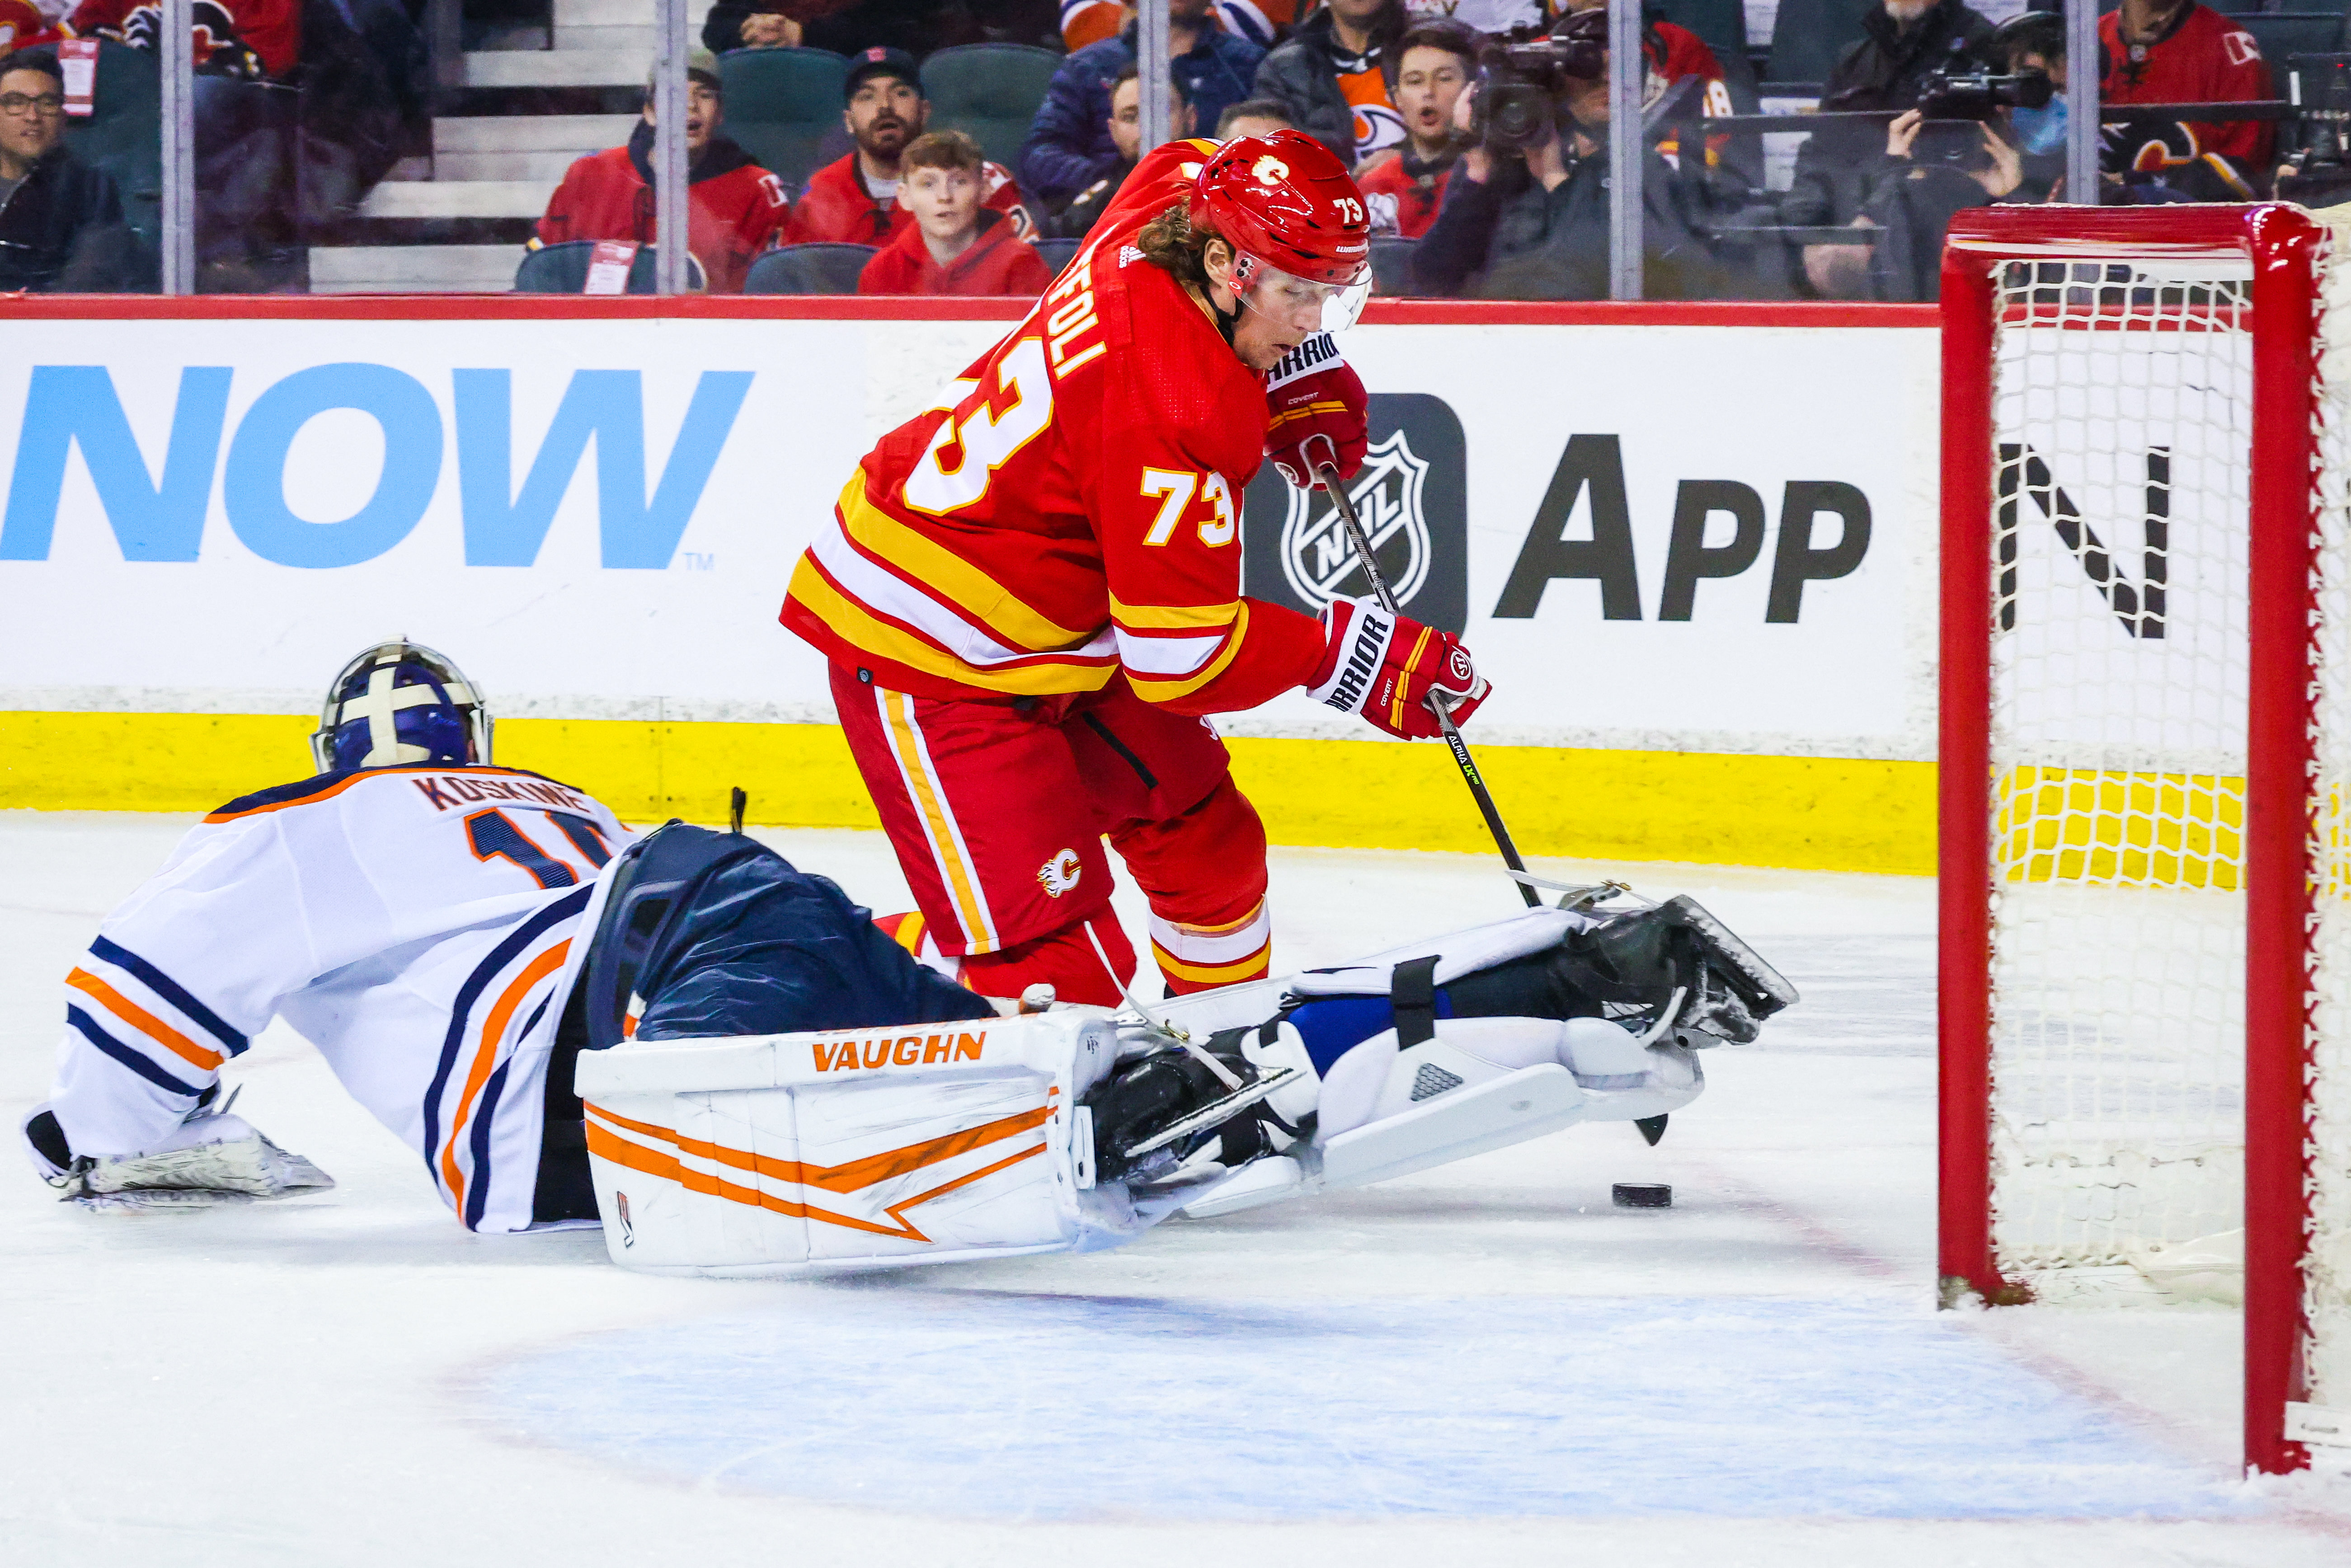 Holy Moly, Tyler Toffoli - Flames take down the Oilers 3-1 - Matchsticks  and Gasoline